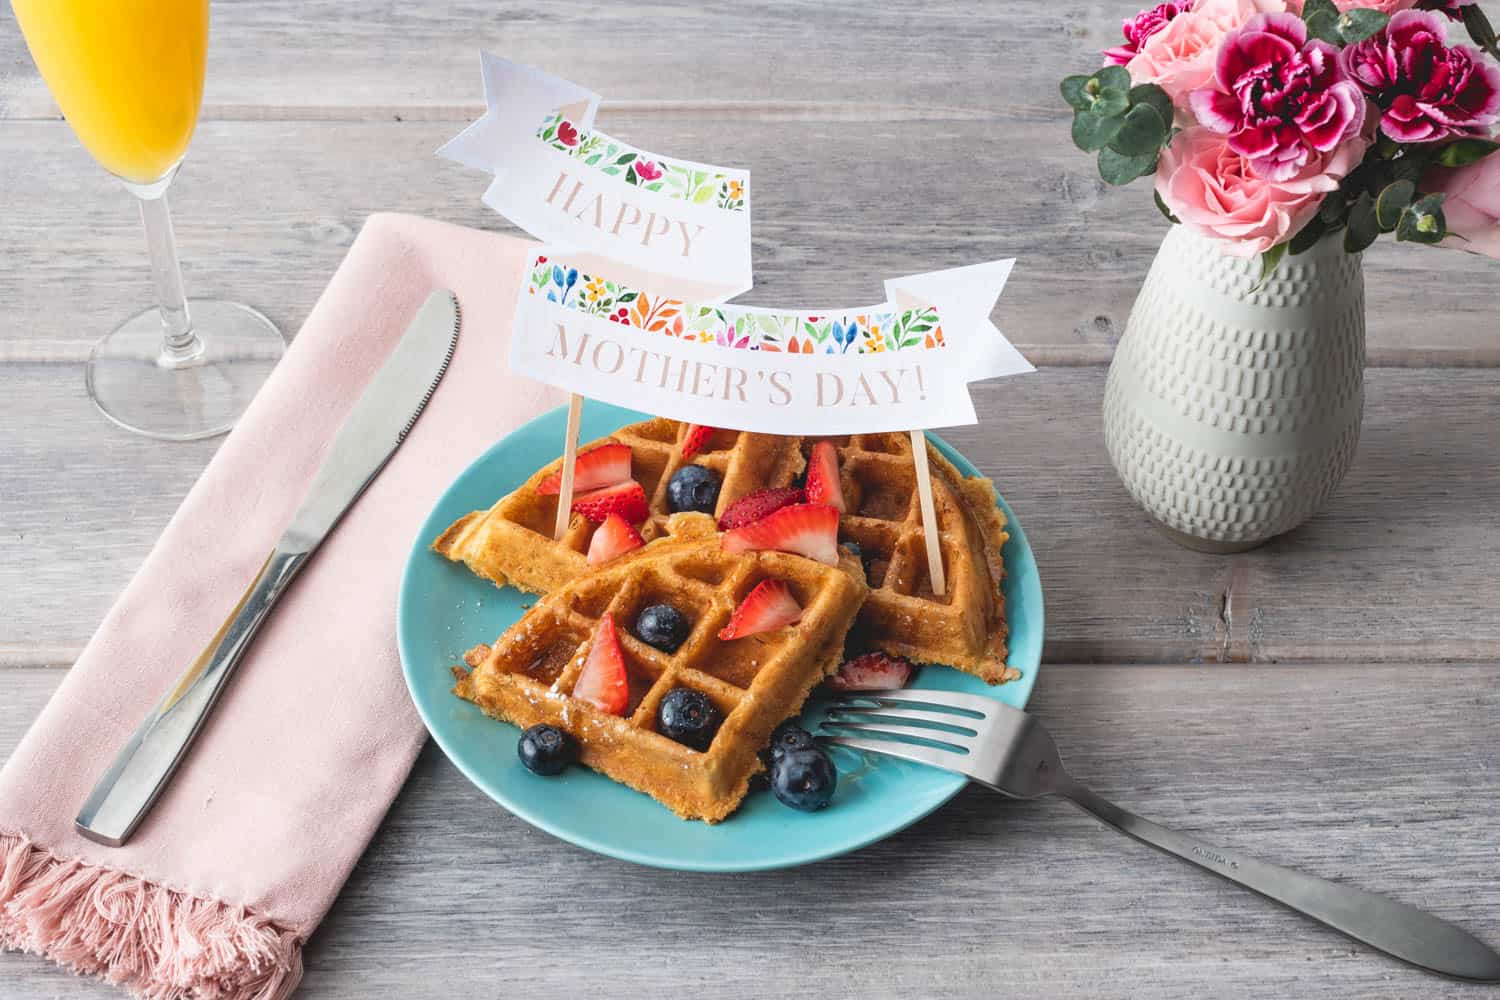 Free mother's day gifts - Happy Mother's Day free printable banner on breakfast in bed blue plate with waffle and fresh fruit. 